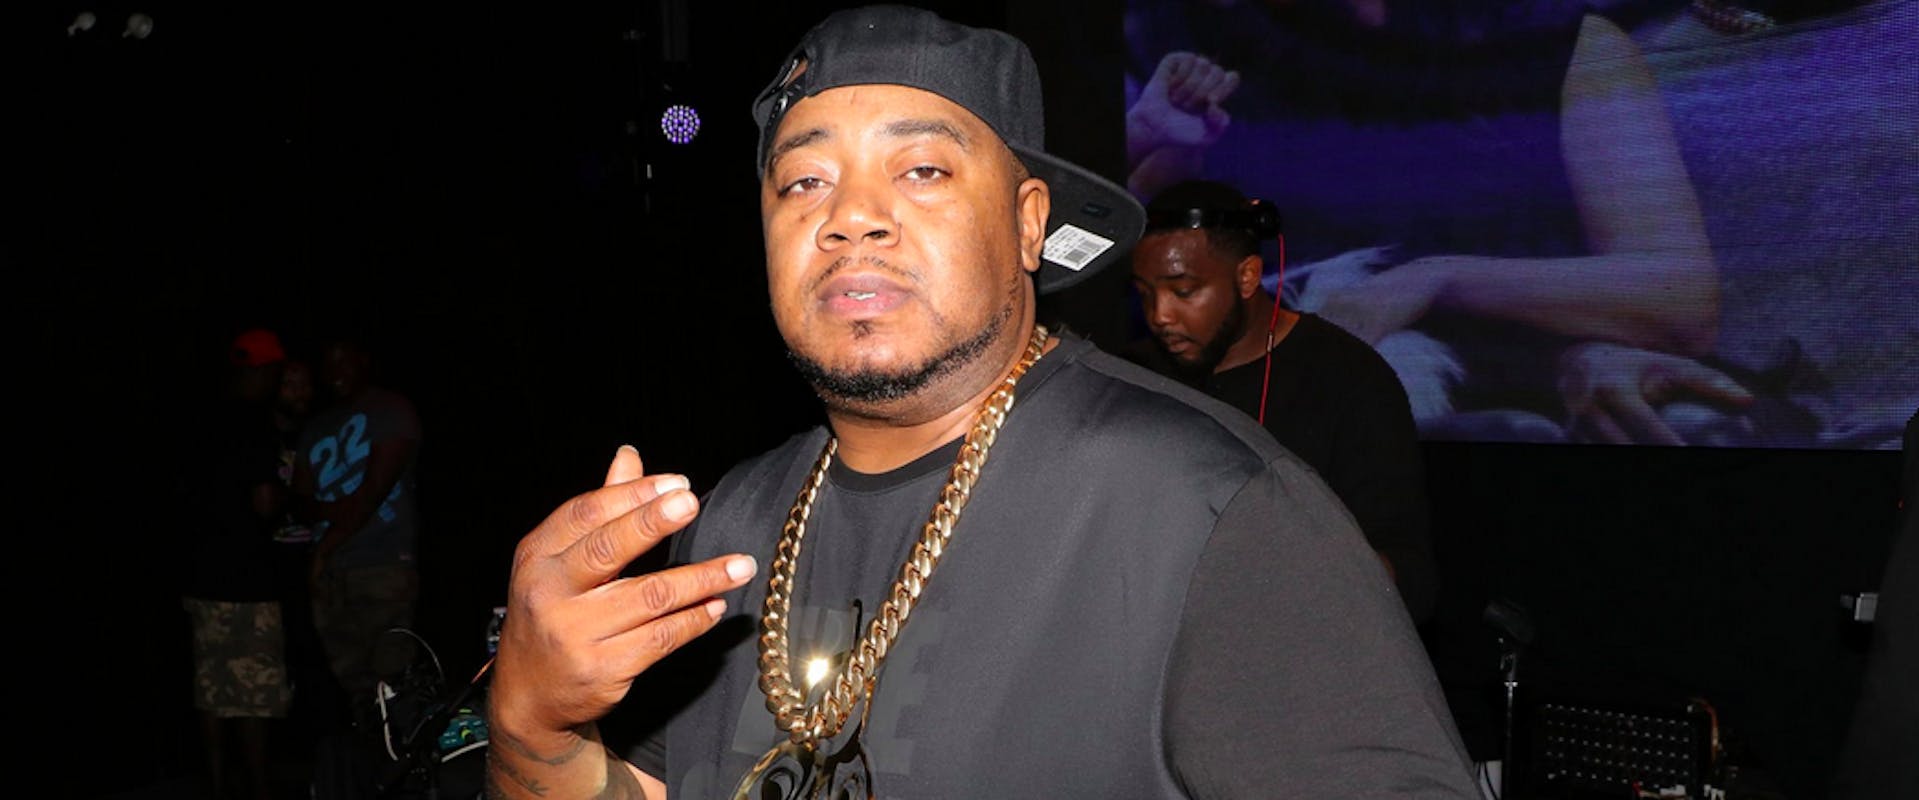 NEW YORK, NY - JULY 14: Twista performs at the Yeezy Taught Me In Concert - New York, NY at Highline Ballroom on July 14, 2017 in New York City. 